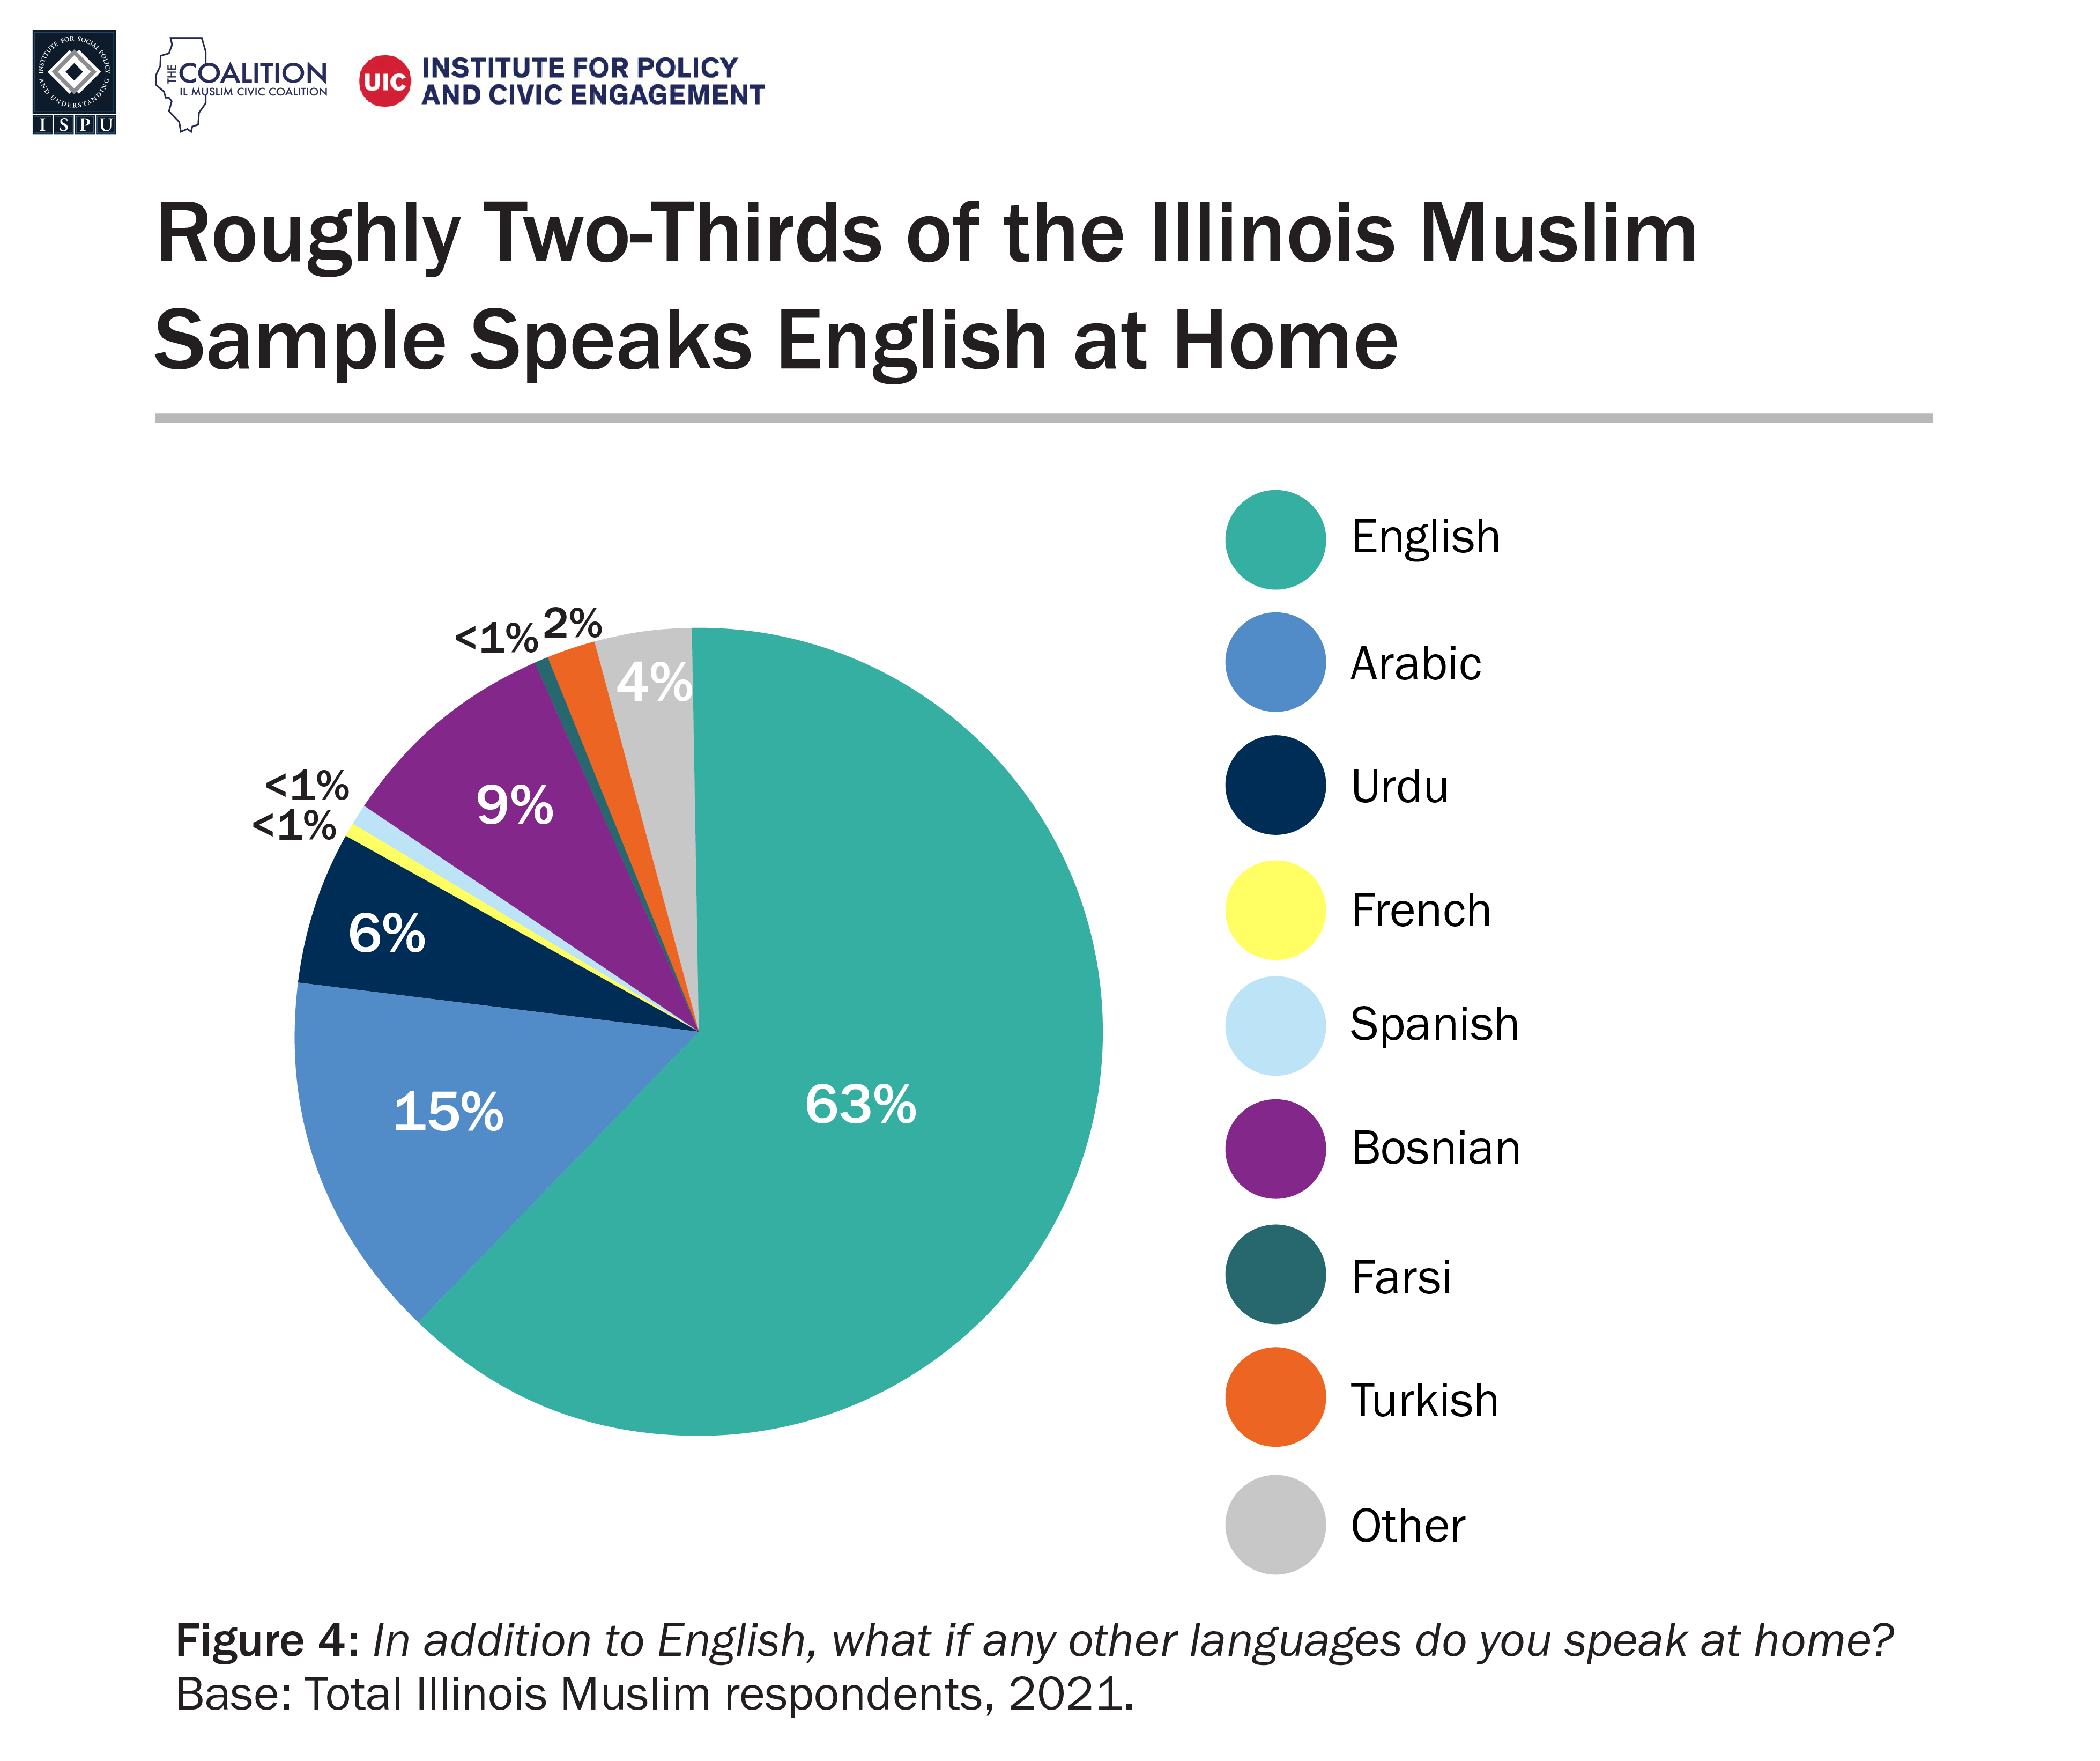 A pie chart showing languages spoken at home among the Illinois Muslim sample